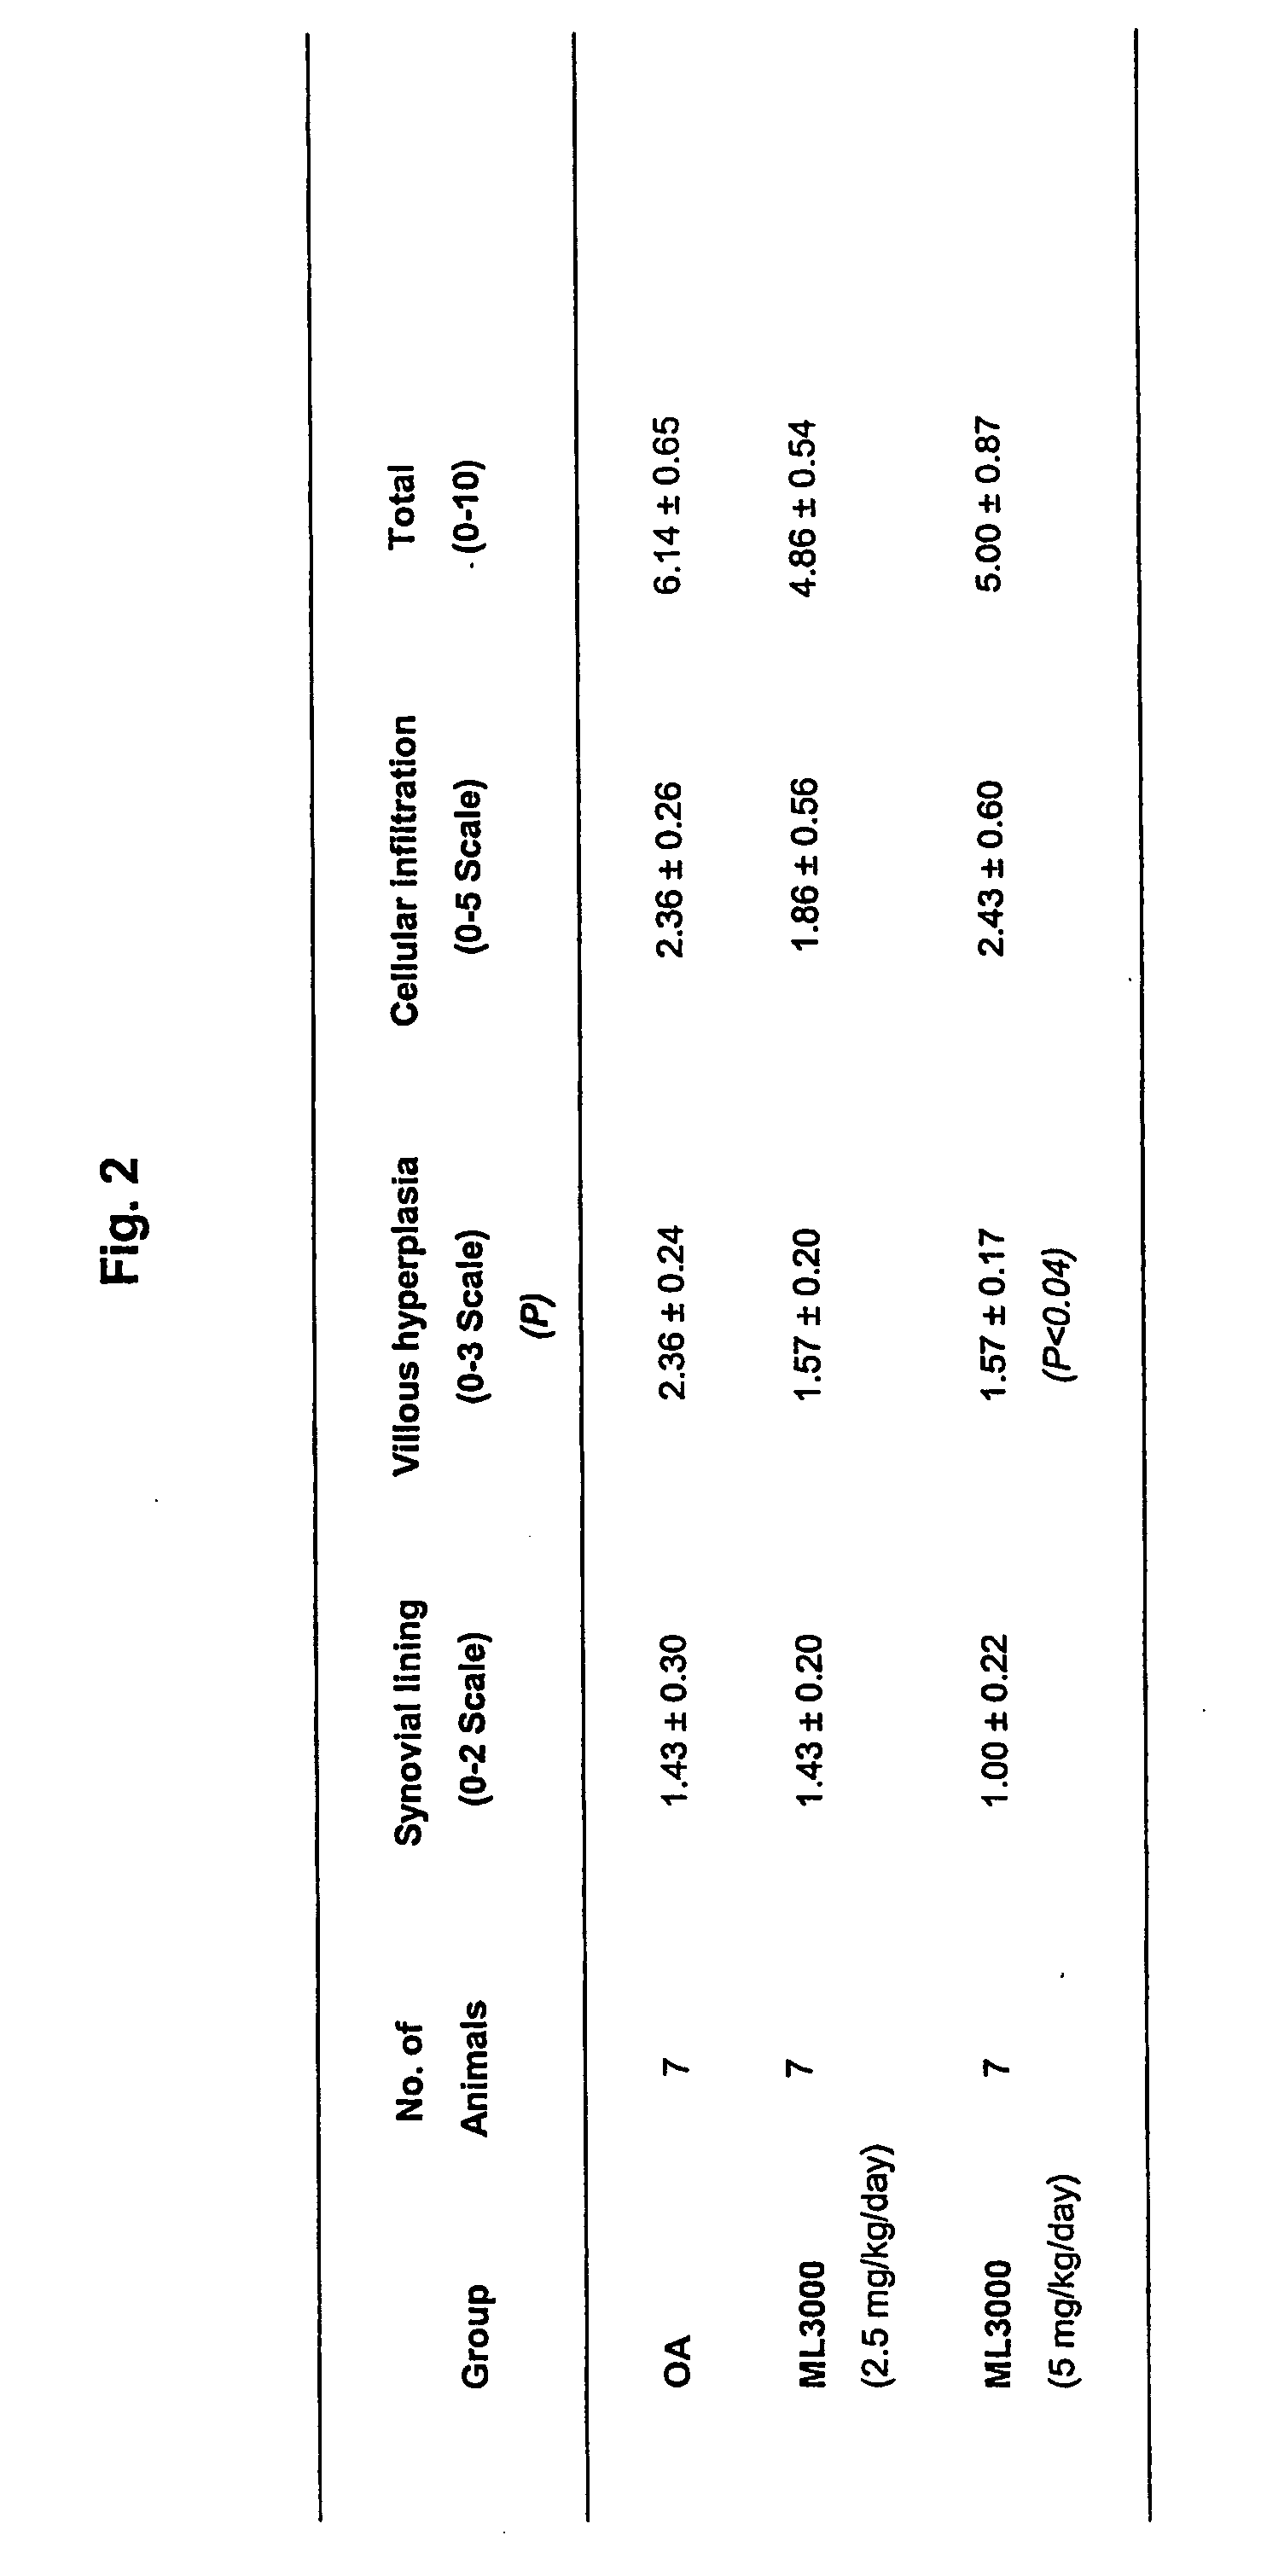 Use of annellated pyrrole compounds in the treatment of articular cartilage or subchondral bone degenaration